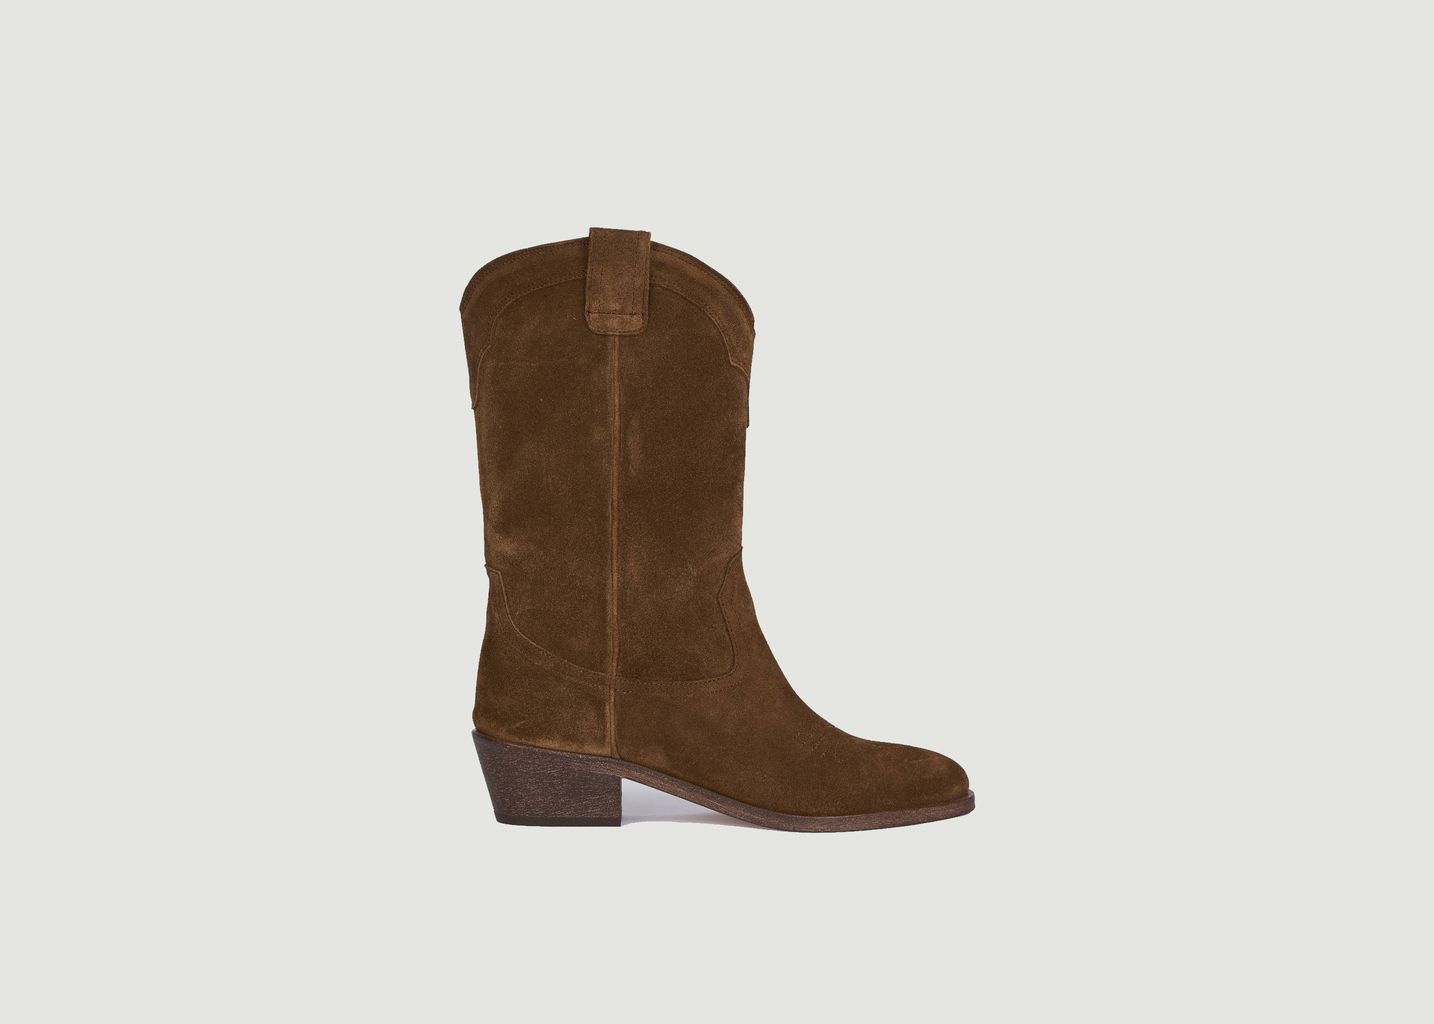 Anthology Paris Welson Suede Leather Boots